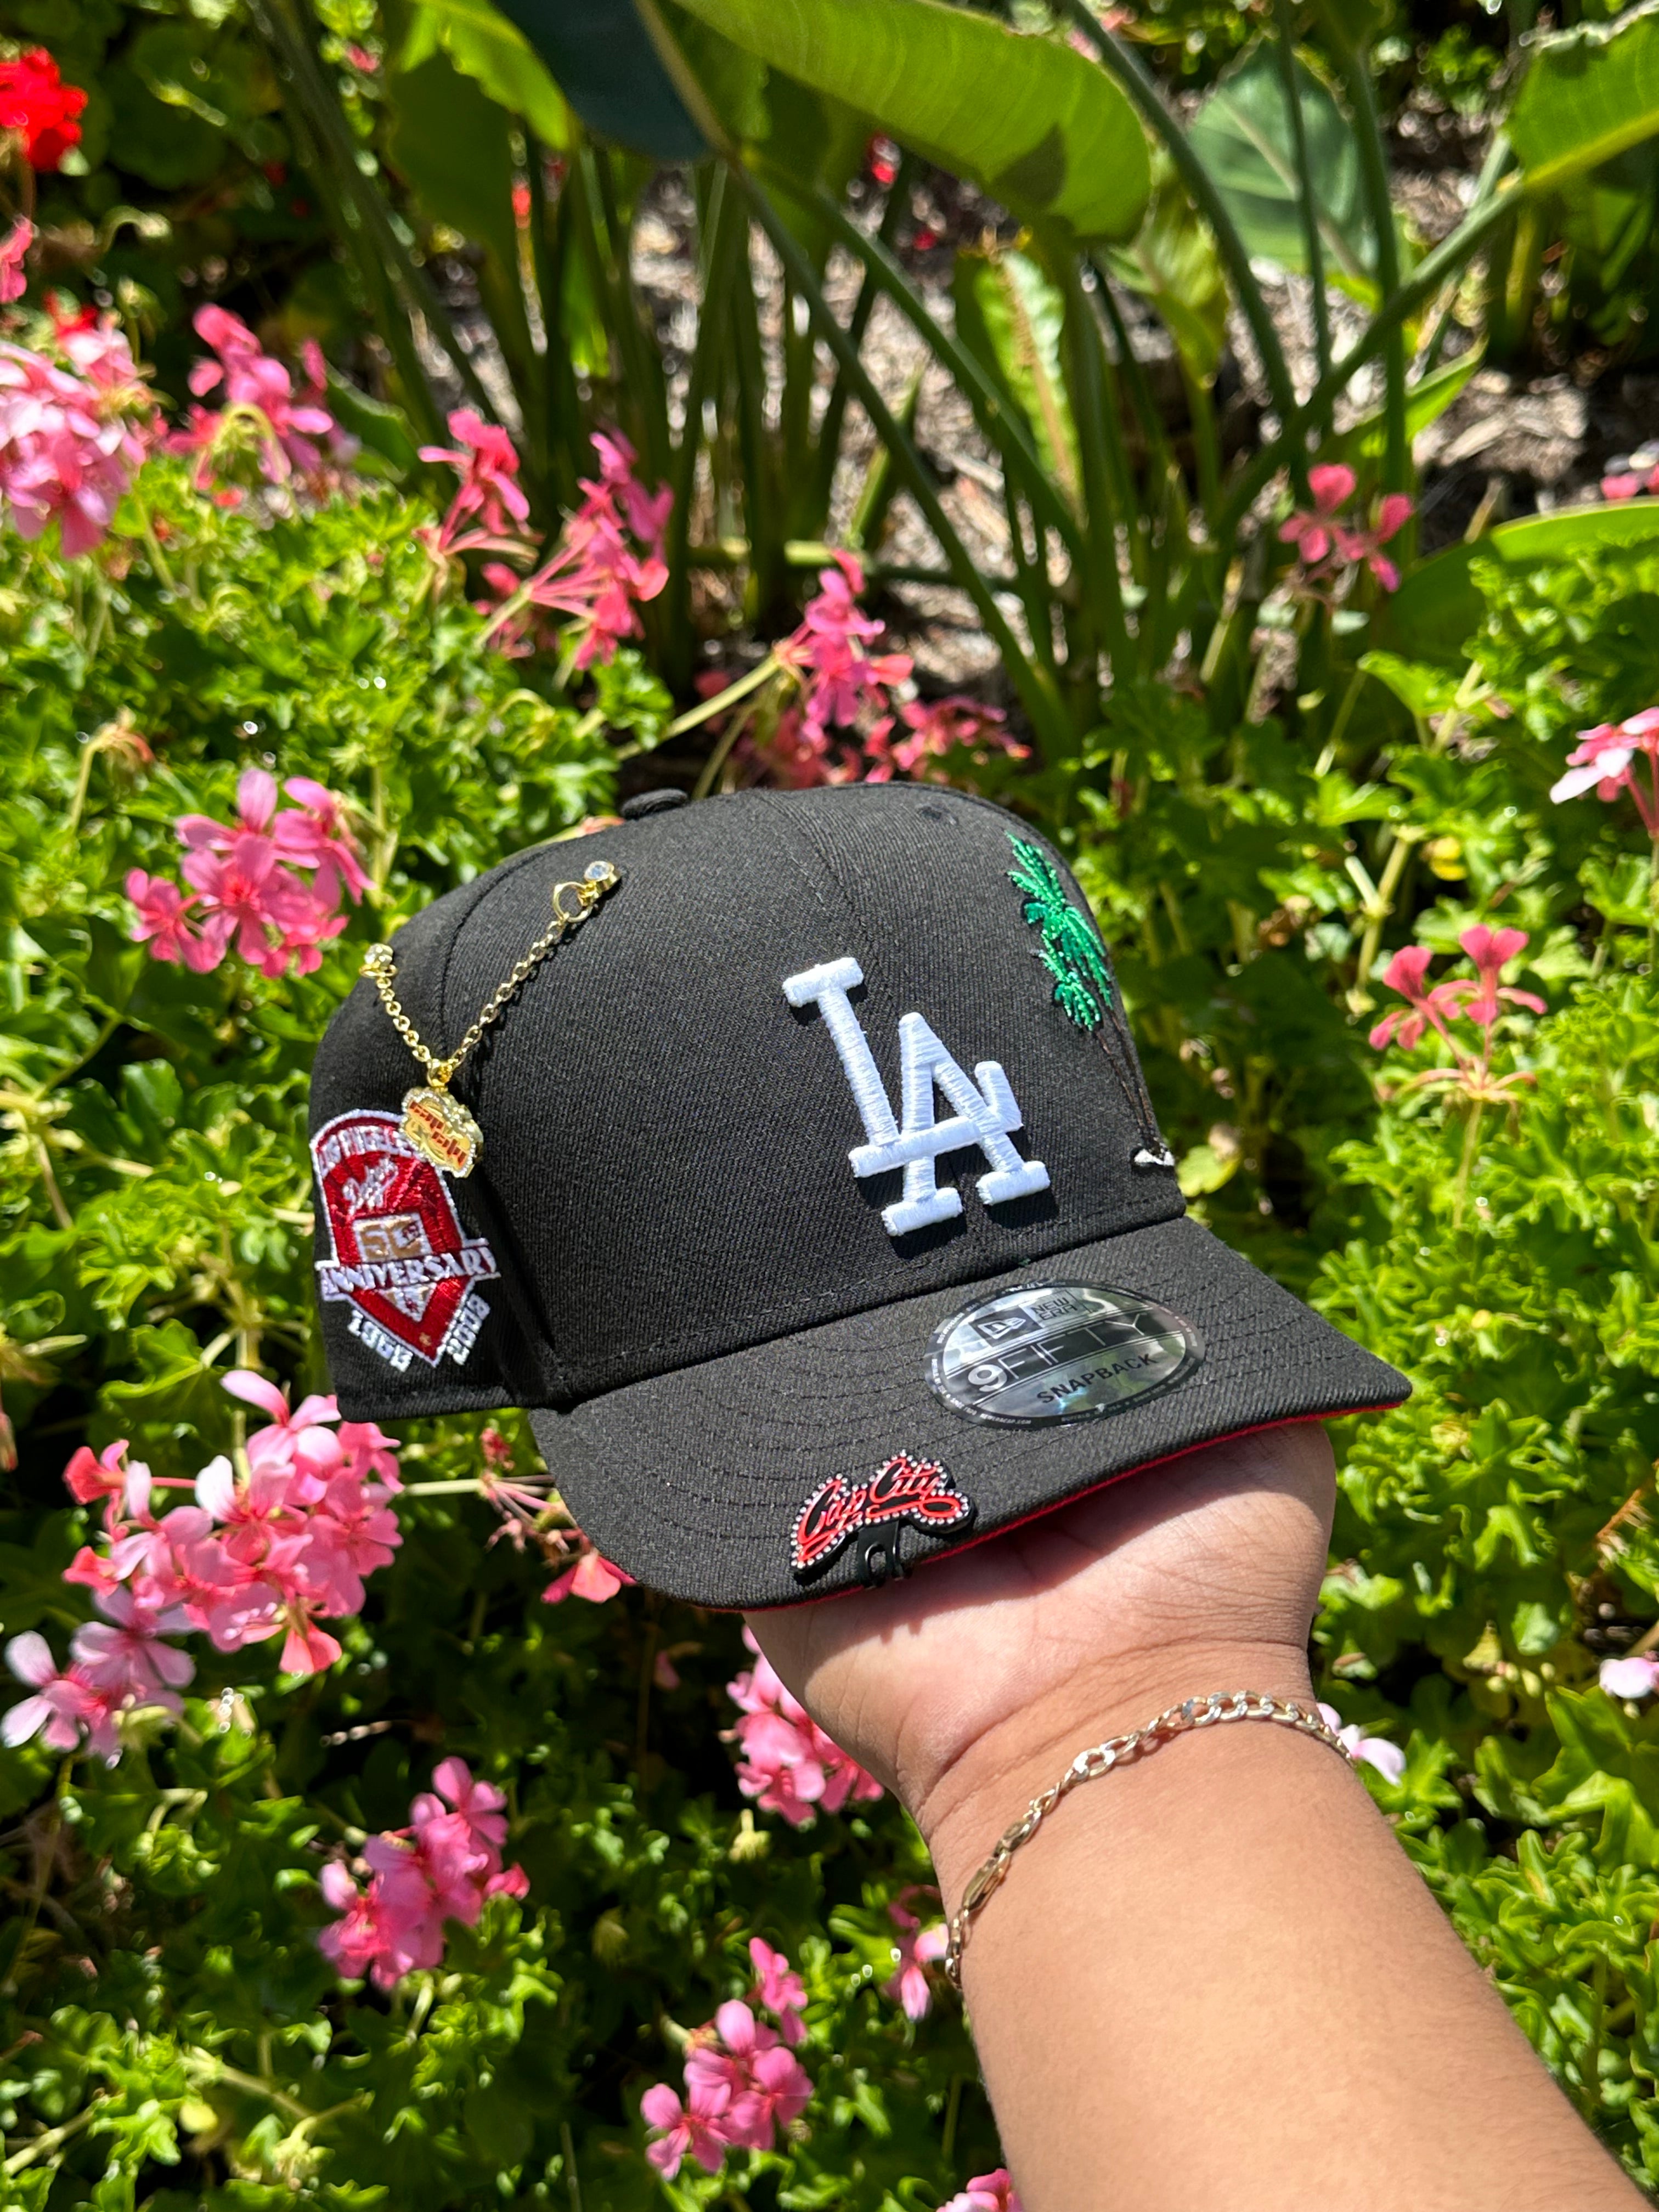 NEW ERA EXCLUSIVE 9FIFTY BLACK LOS ANGELES DODGERS SNAPBACK W/ PALM TREE + 50TH ANNIVERSARY PATCH